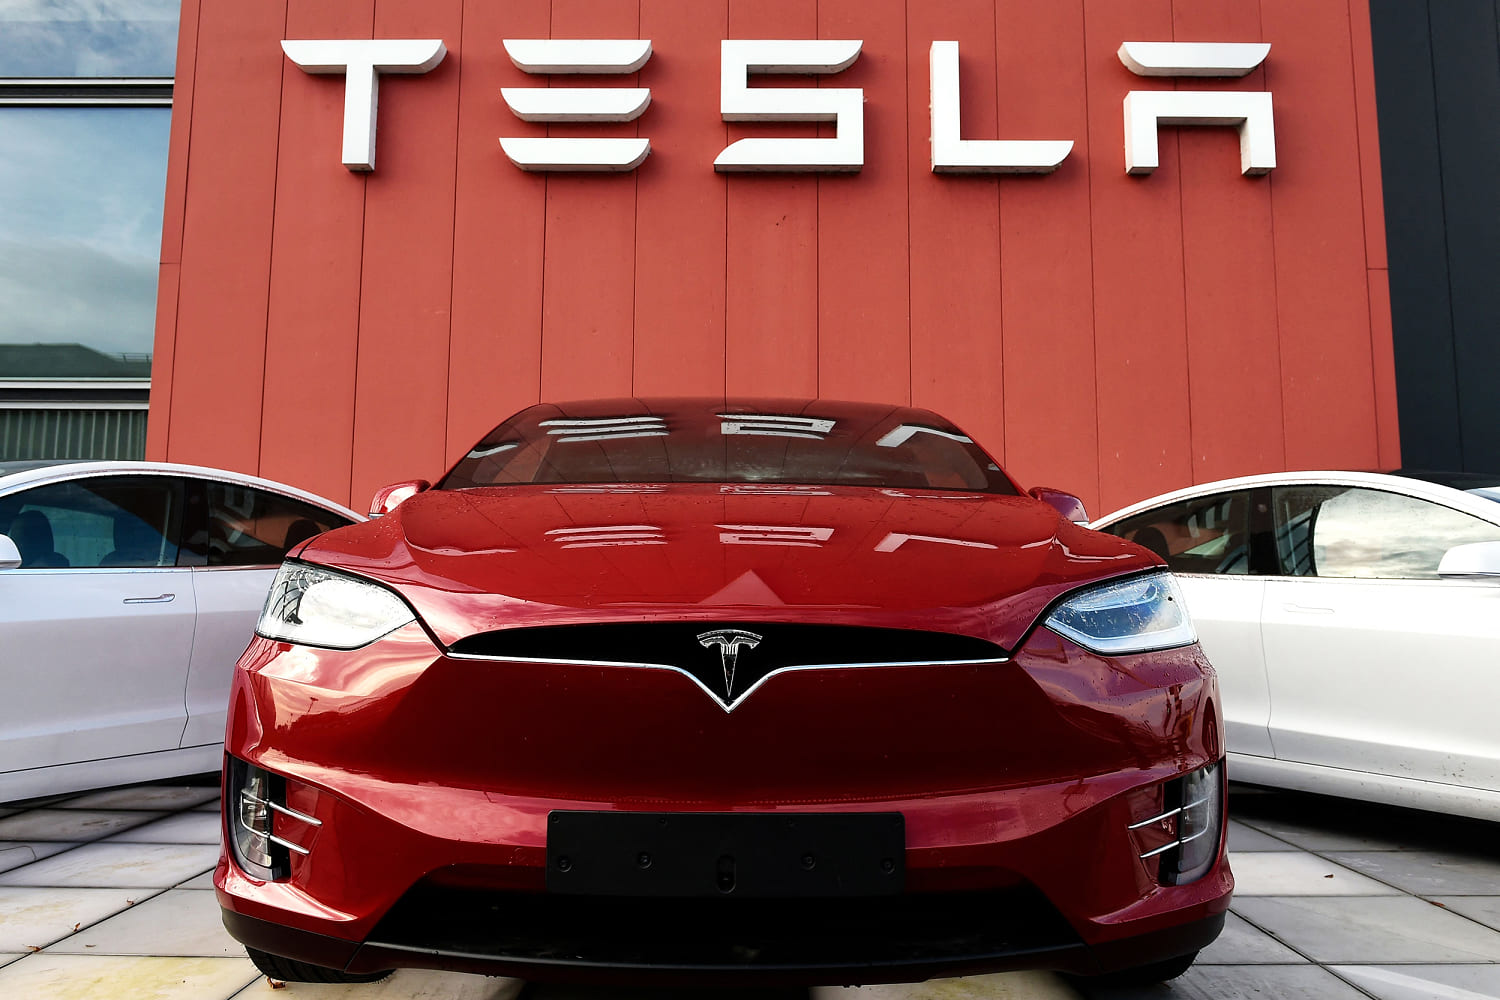 Tesla to recall 125,227 vehicles over faulty seat belt warning system